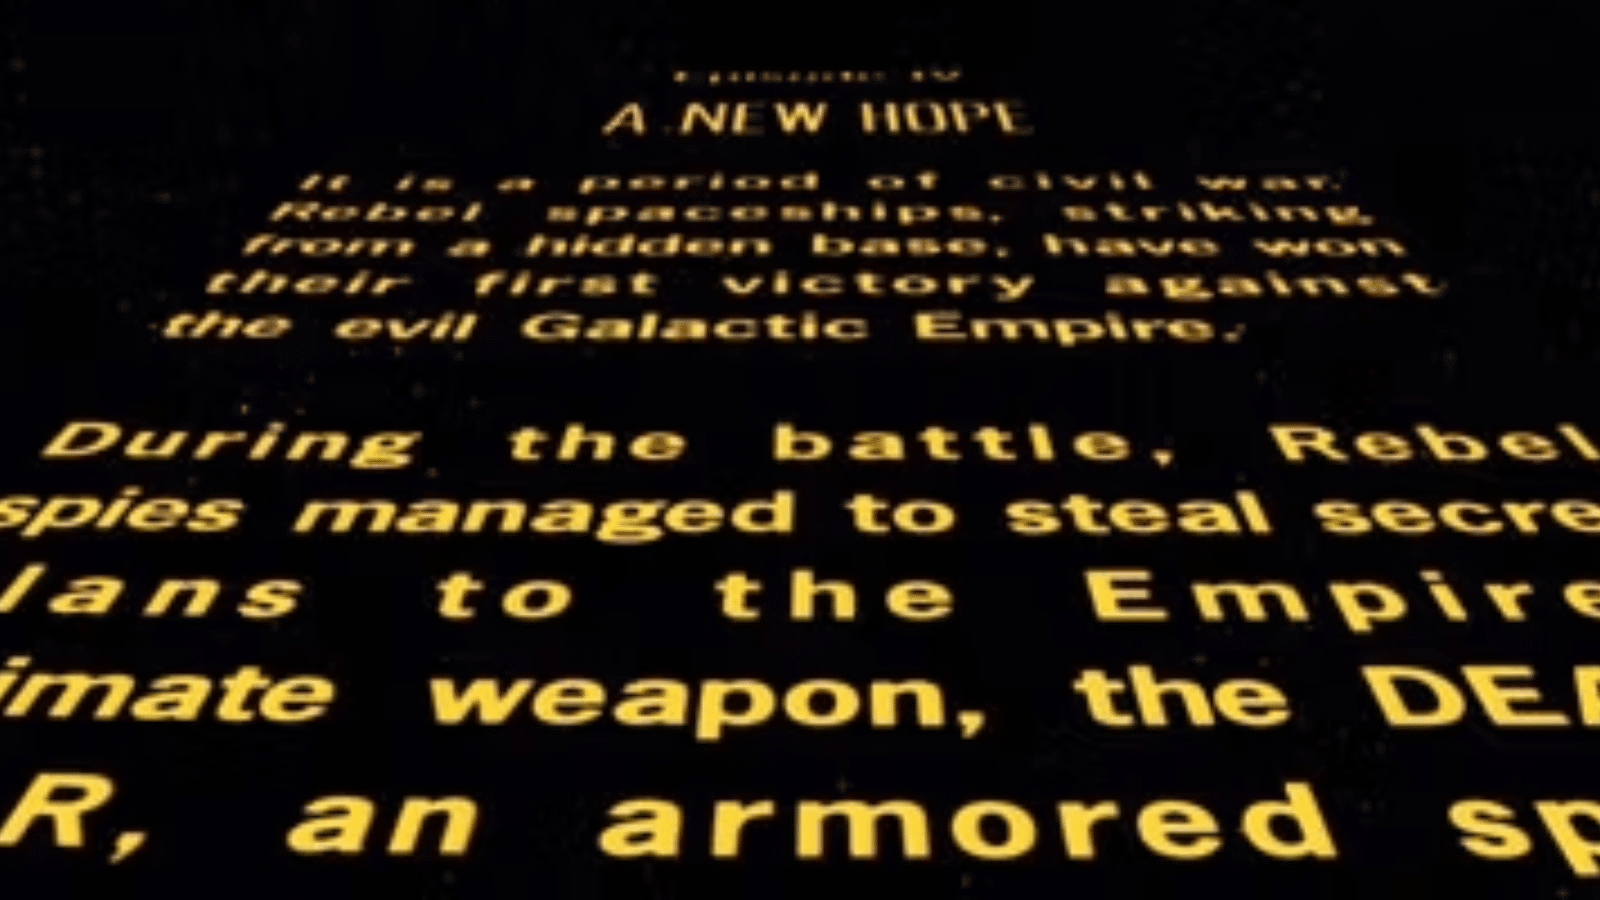 A New Hope Opening Crawl